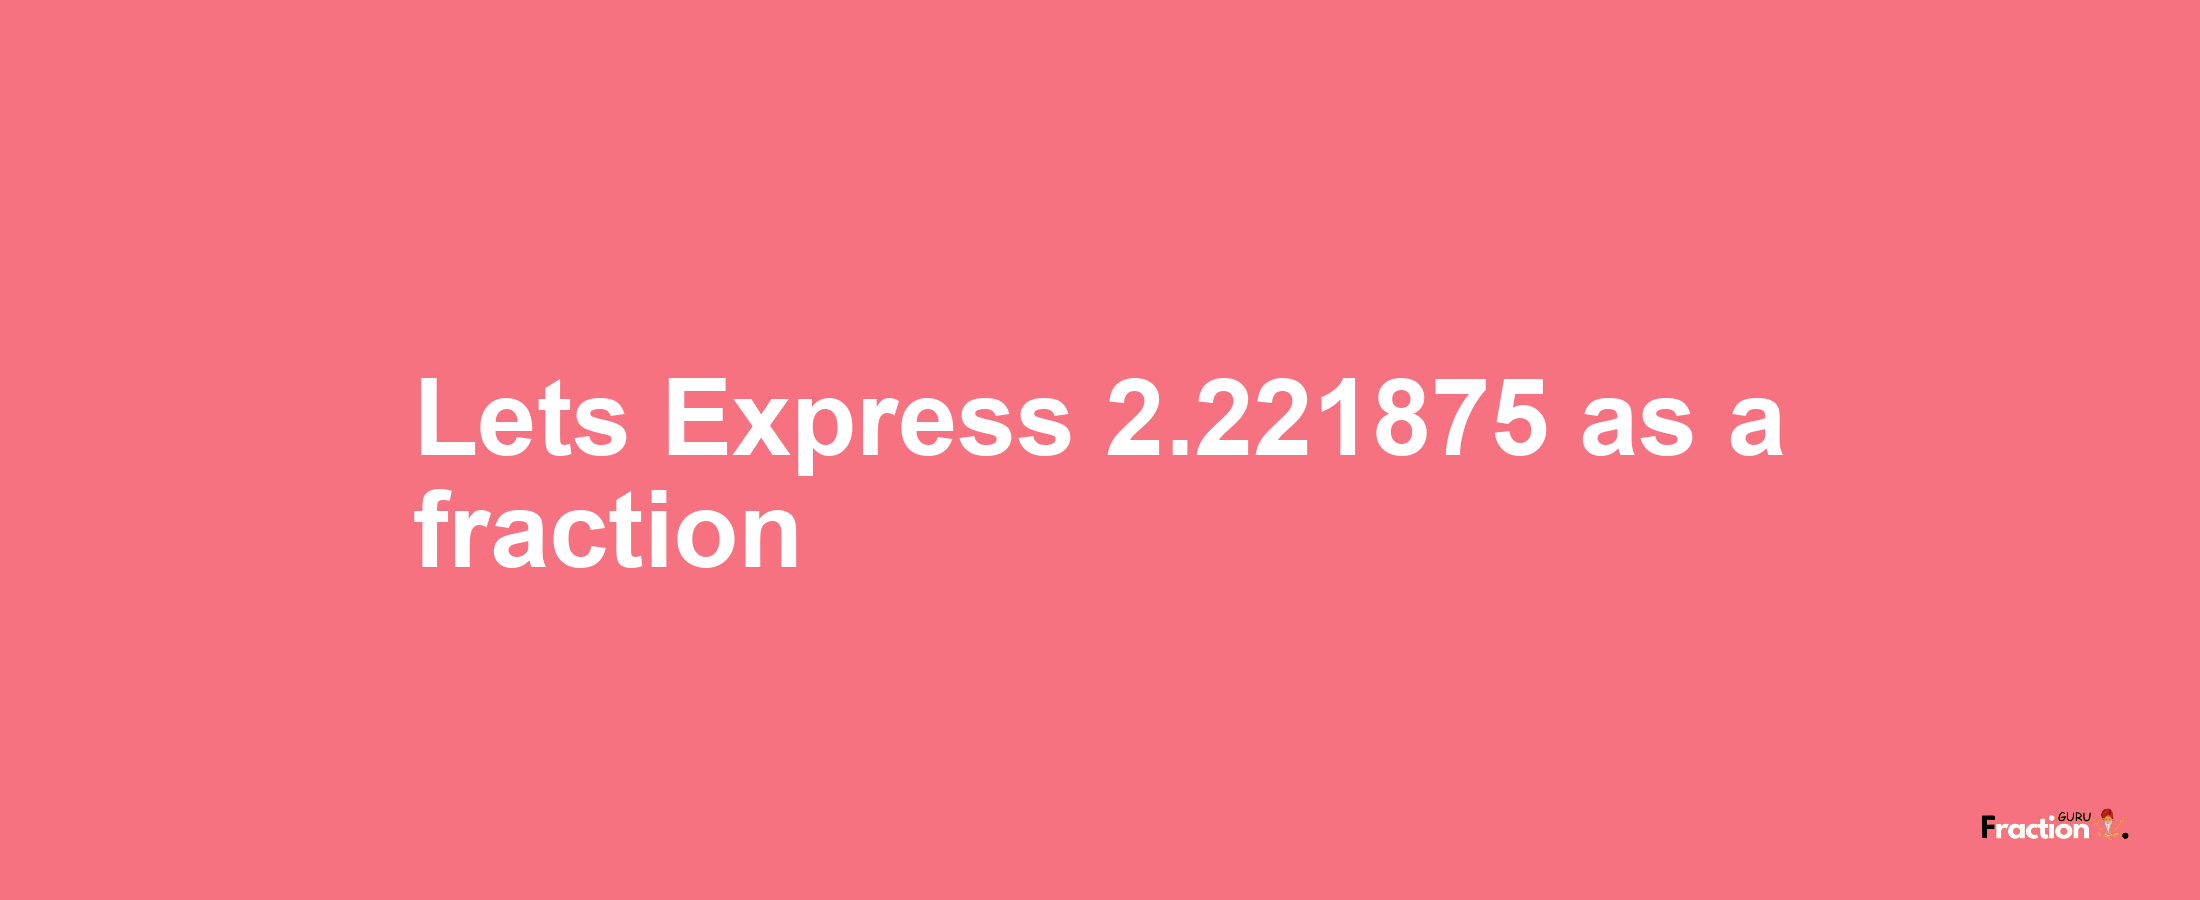 Lets Express 2.221875 as afraction